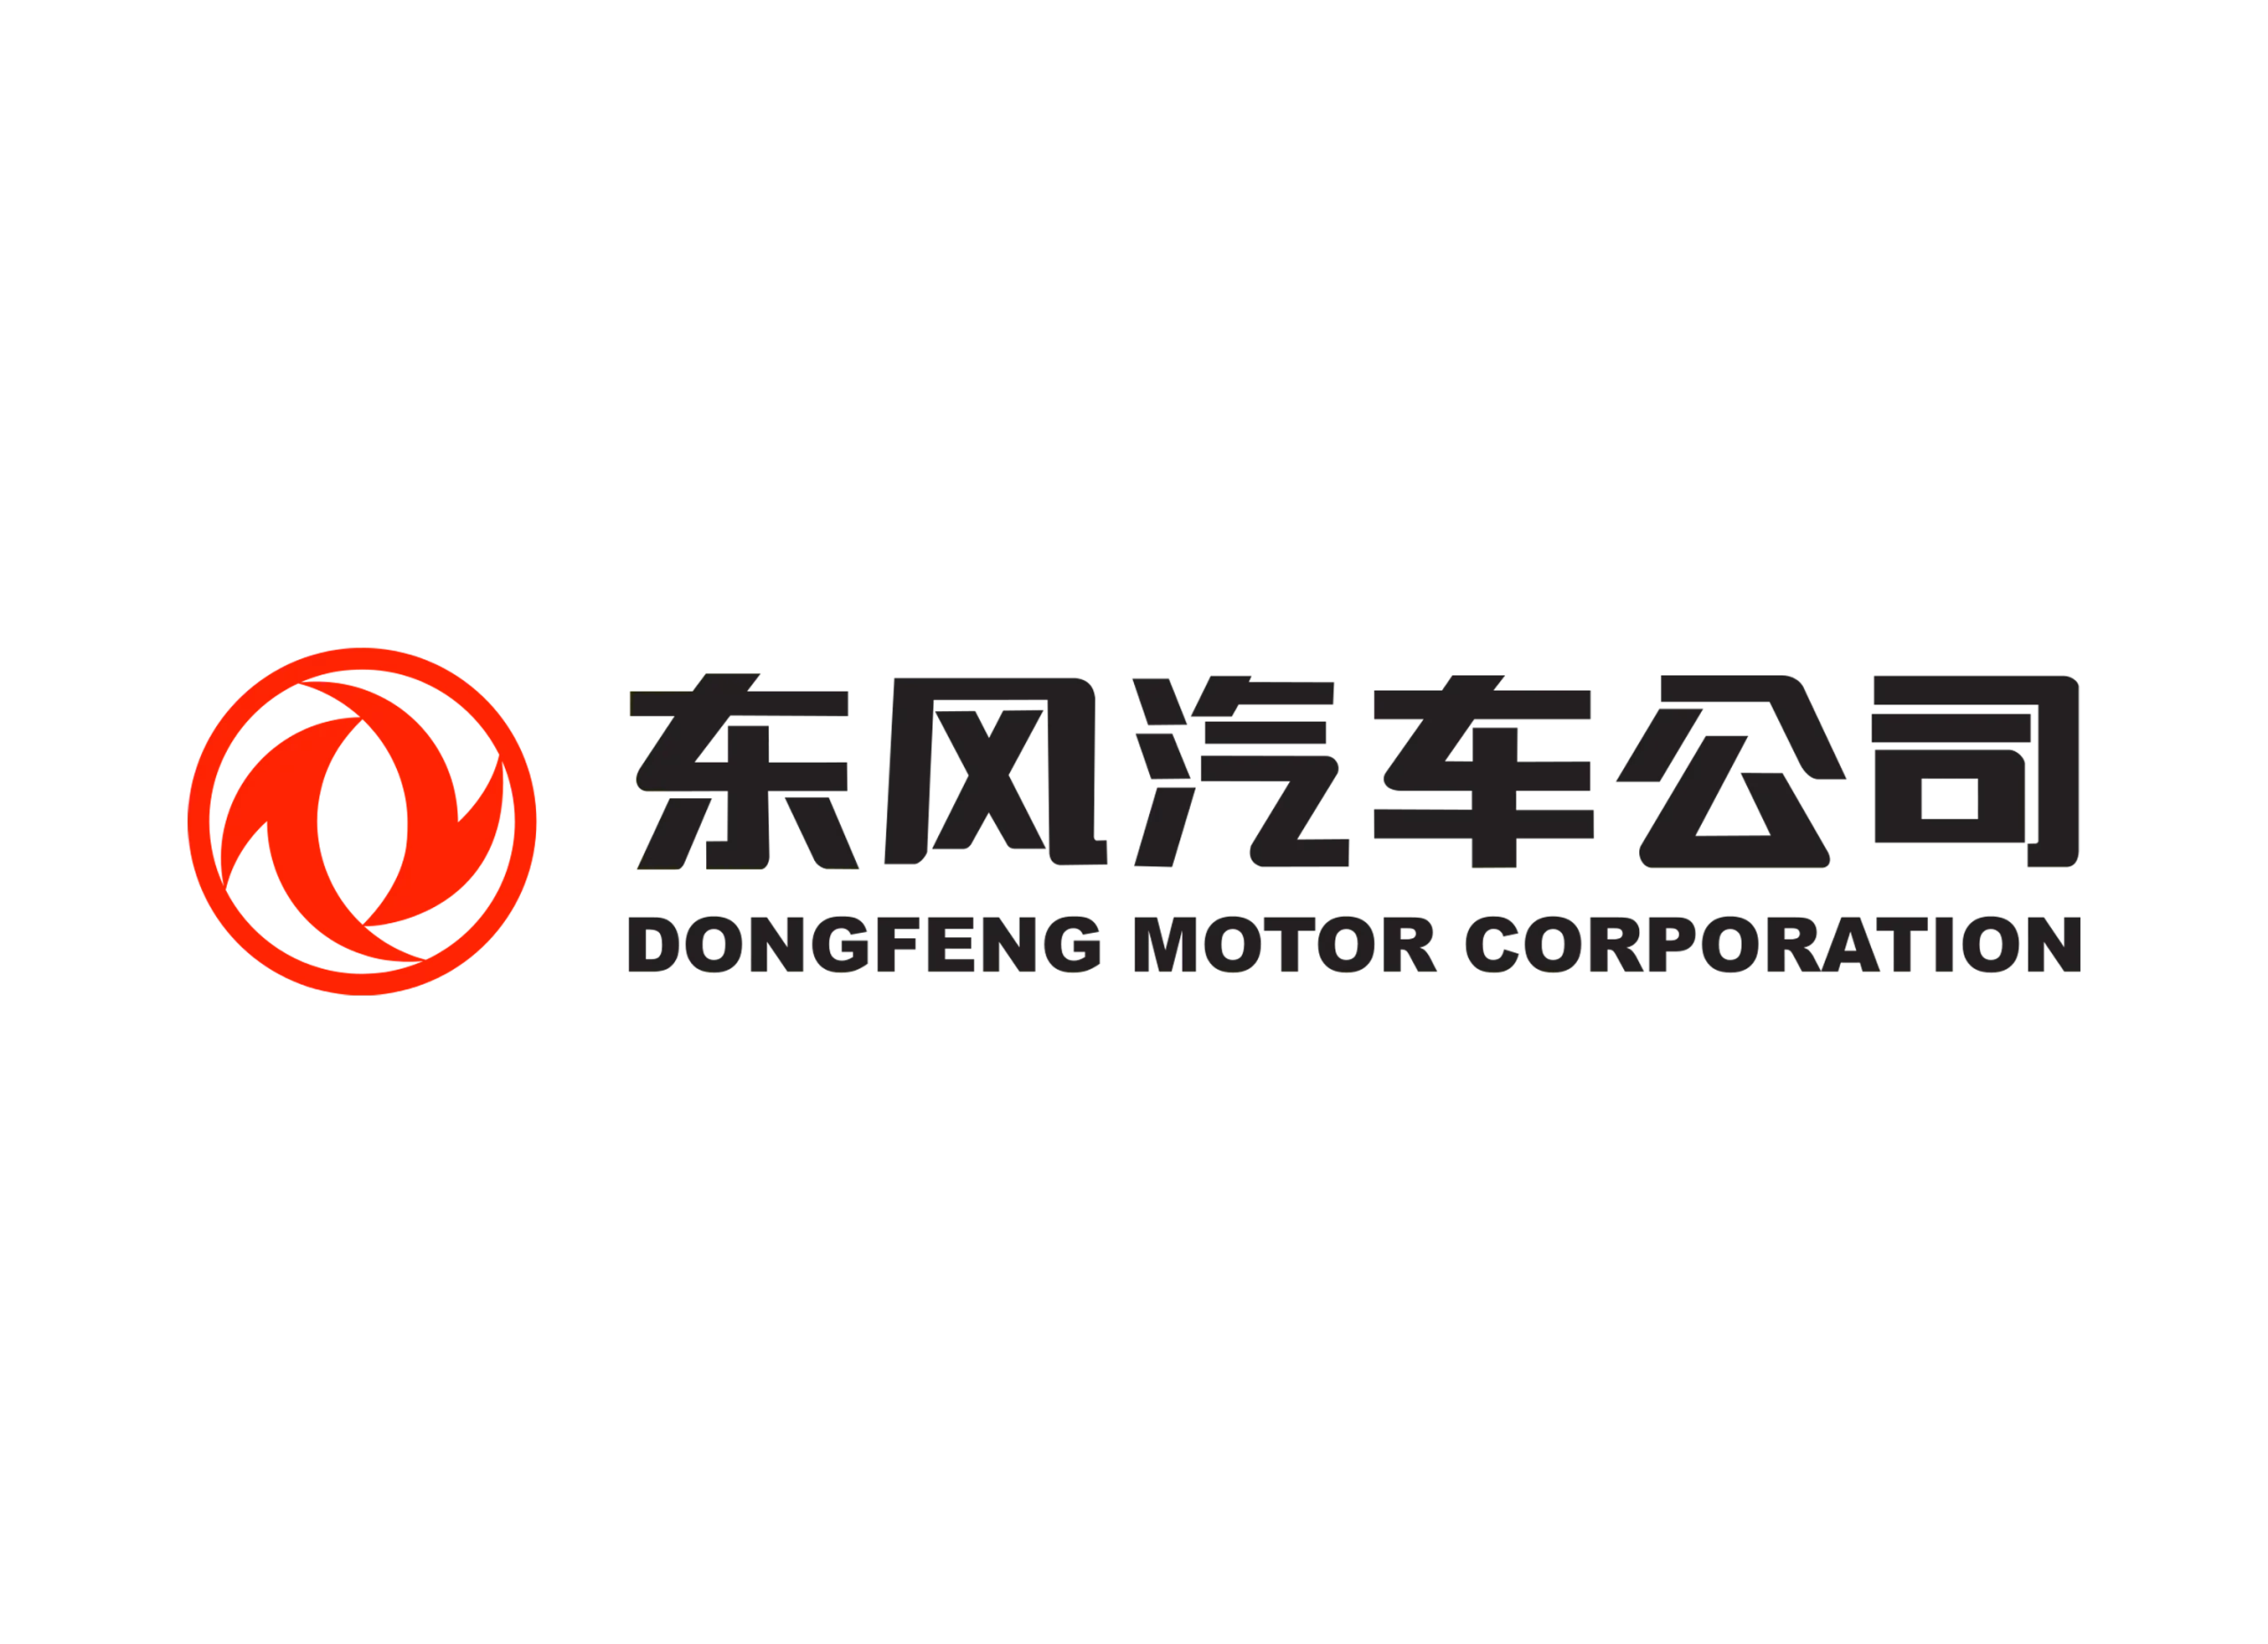 Dongfeng logo present